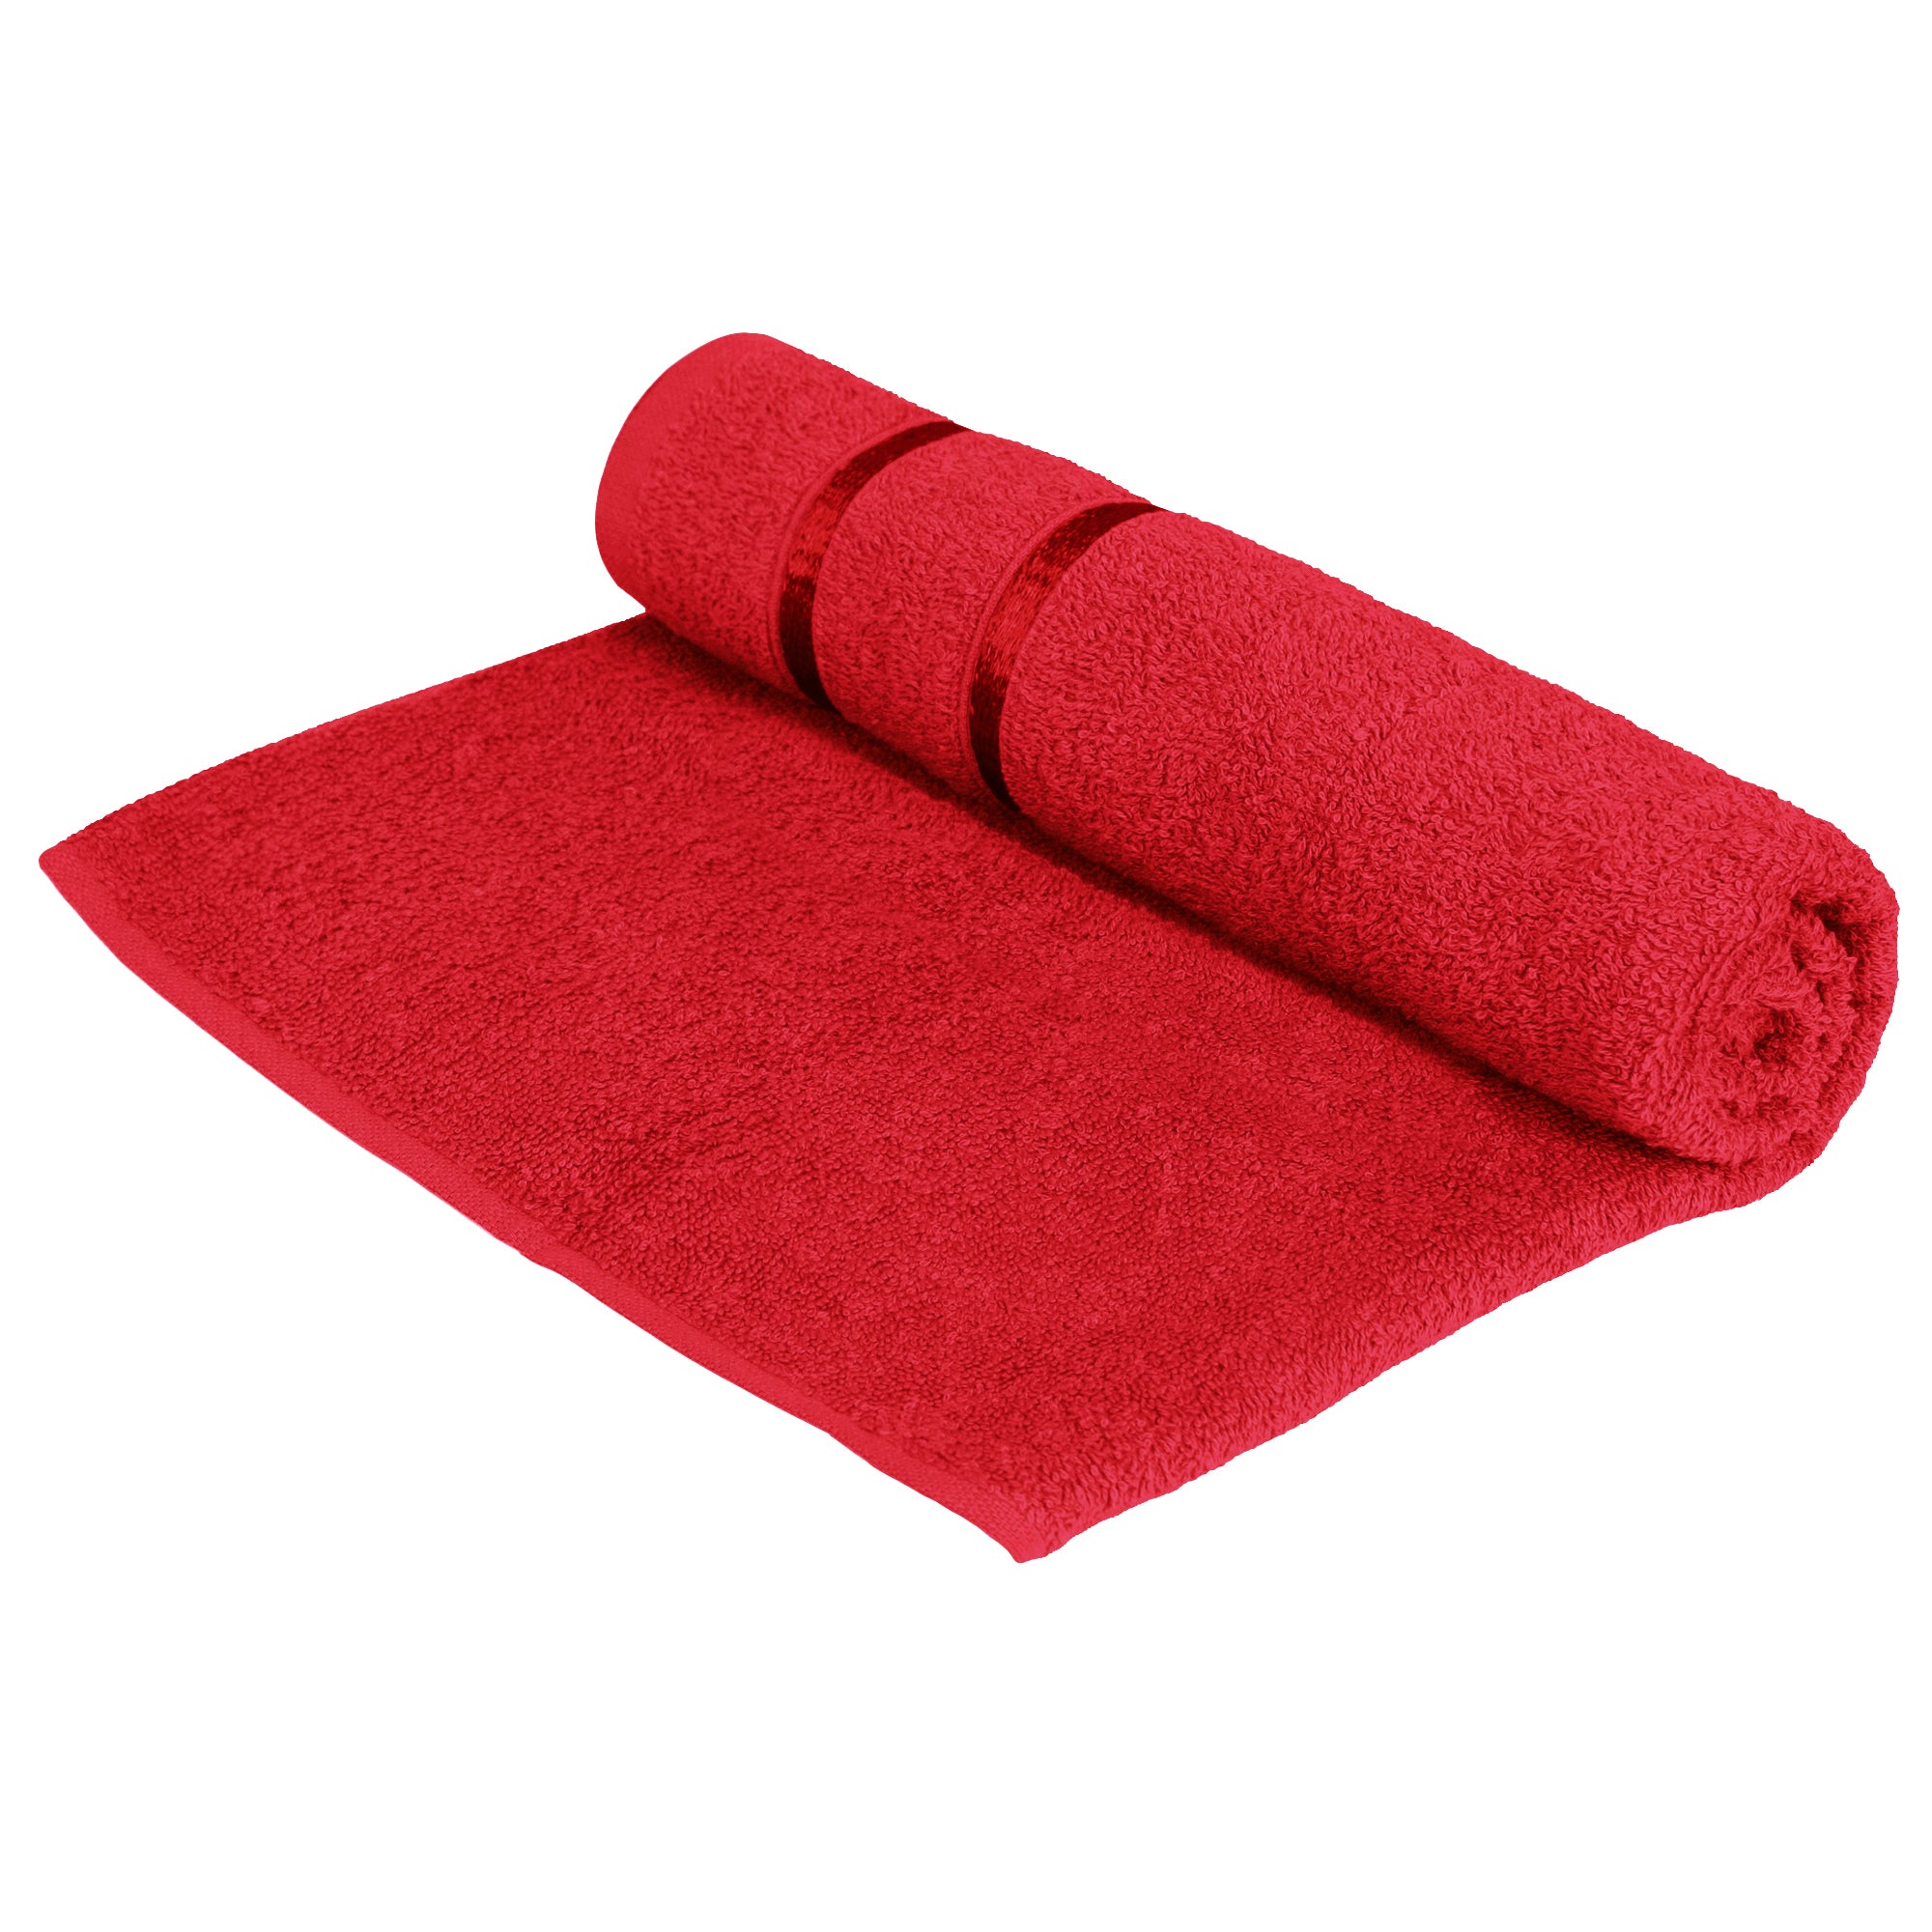 Story@Home 2 Units 100% Cotton Ladies Bath Towels - Pink and Wine Red